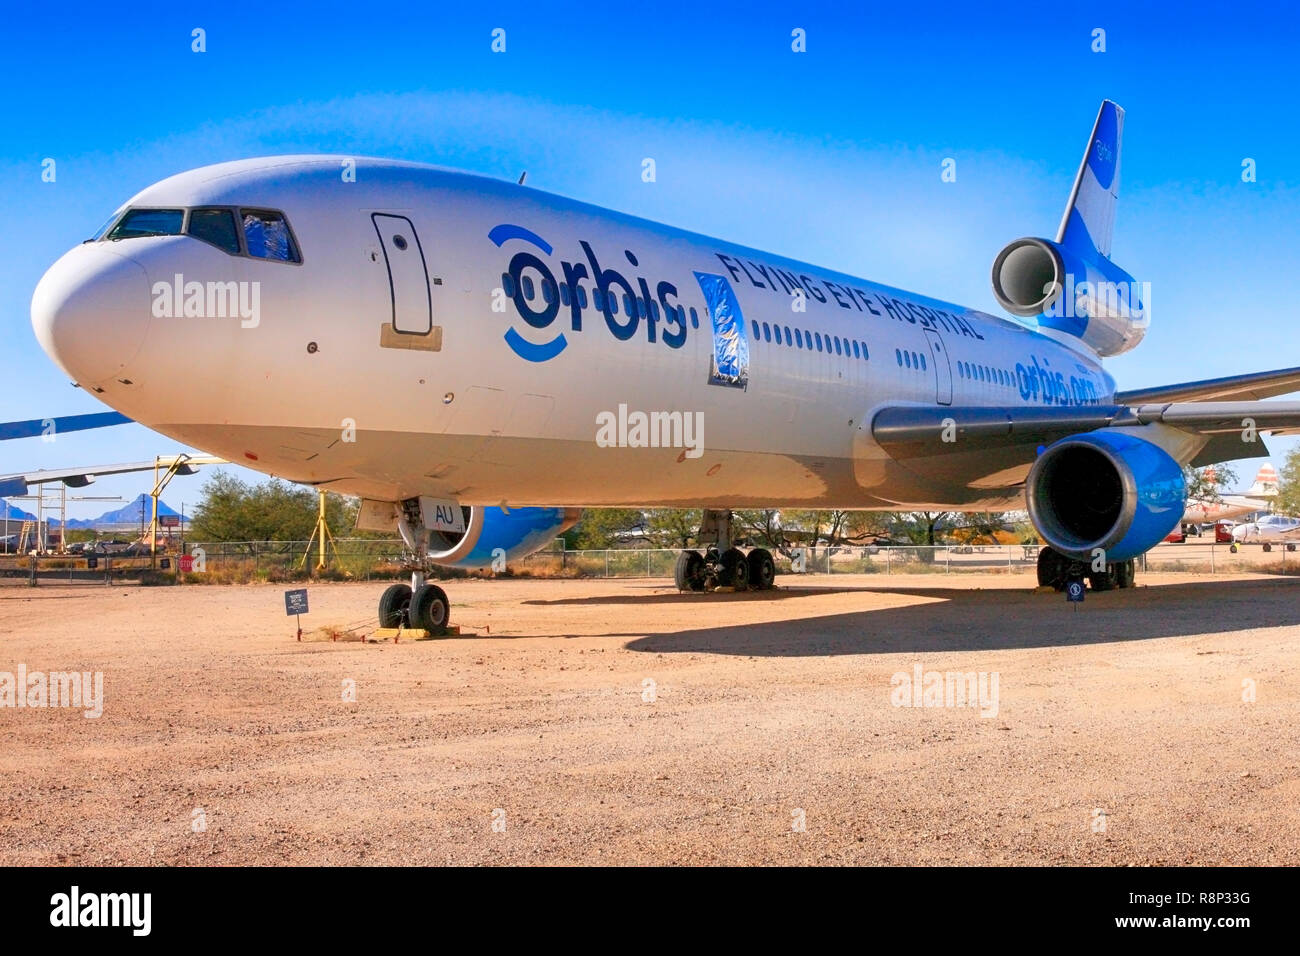 Orbis International Flying Eye Hospital DC-10 on display at the Pima Air & Space Museum in Tucson, AZ Stock Photo